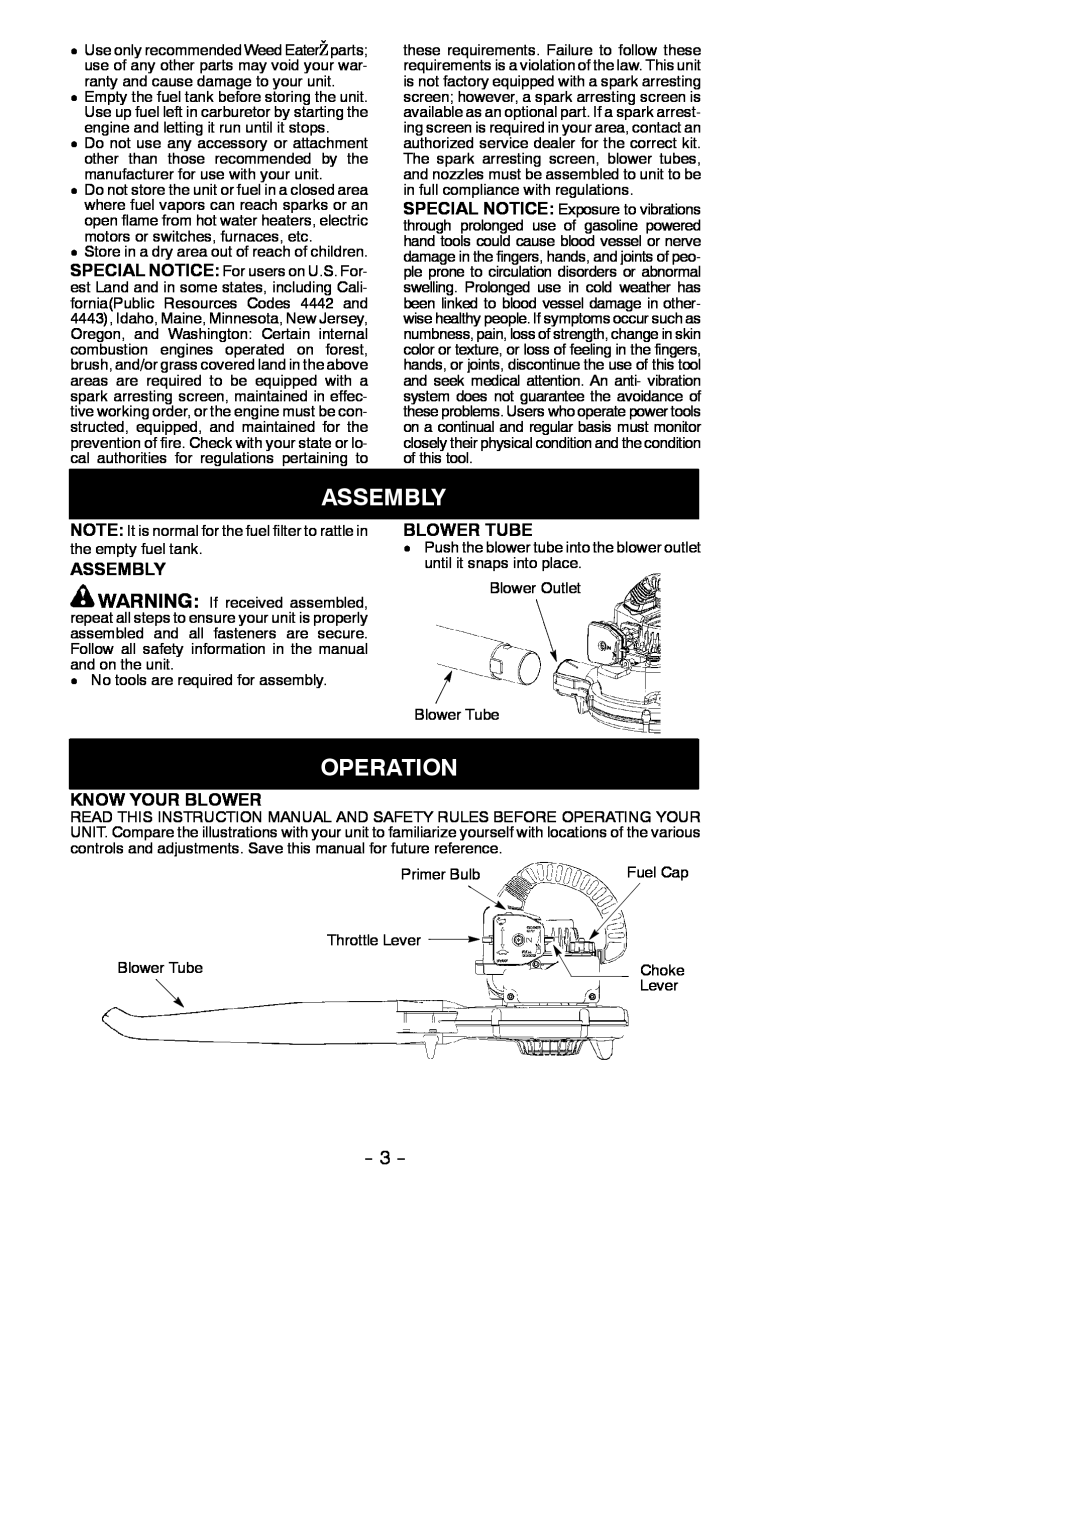 Weed Eater 530164008 instruction manual Assembly, Operation, Blower Tube, Know Your Blower 